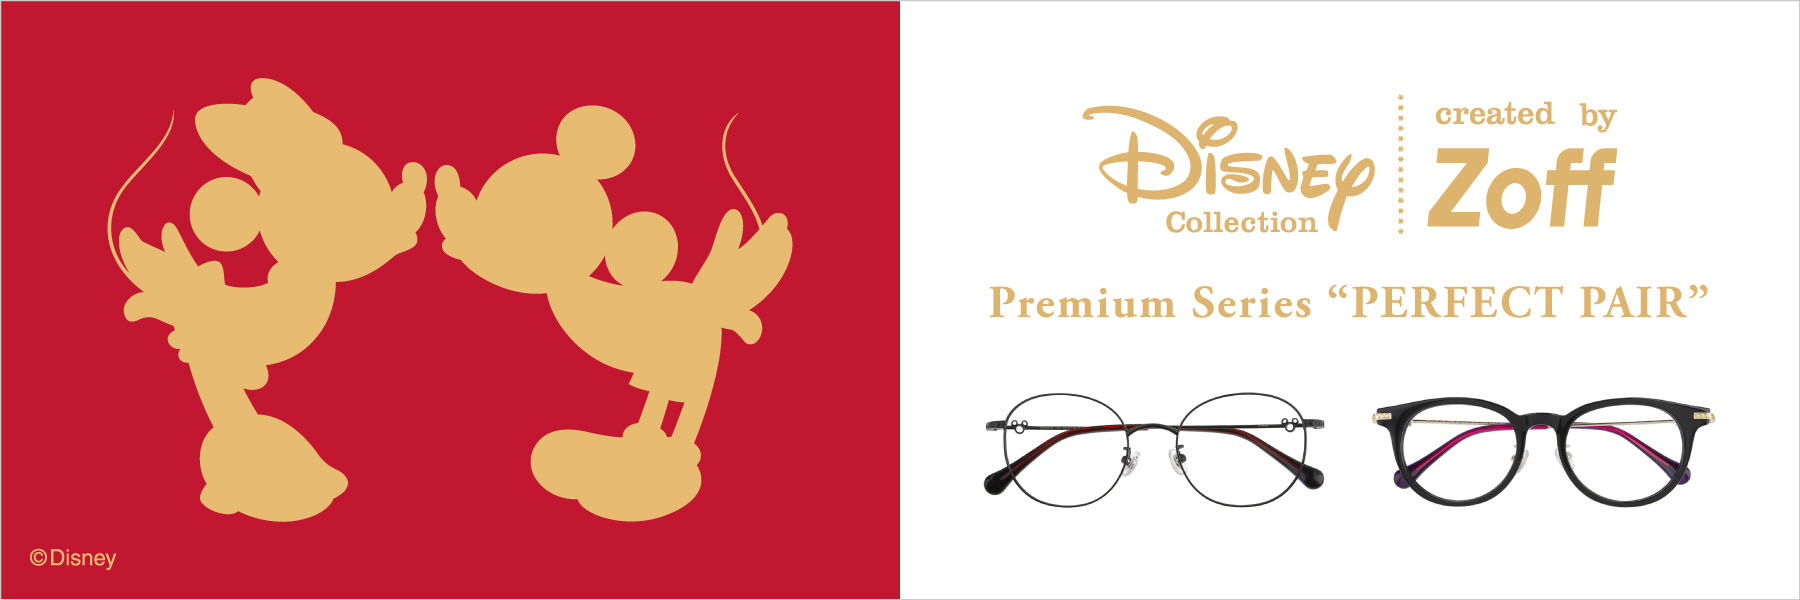 Disney Collection created by Zoff Premium Series “PERFECT PAIR”